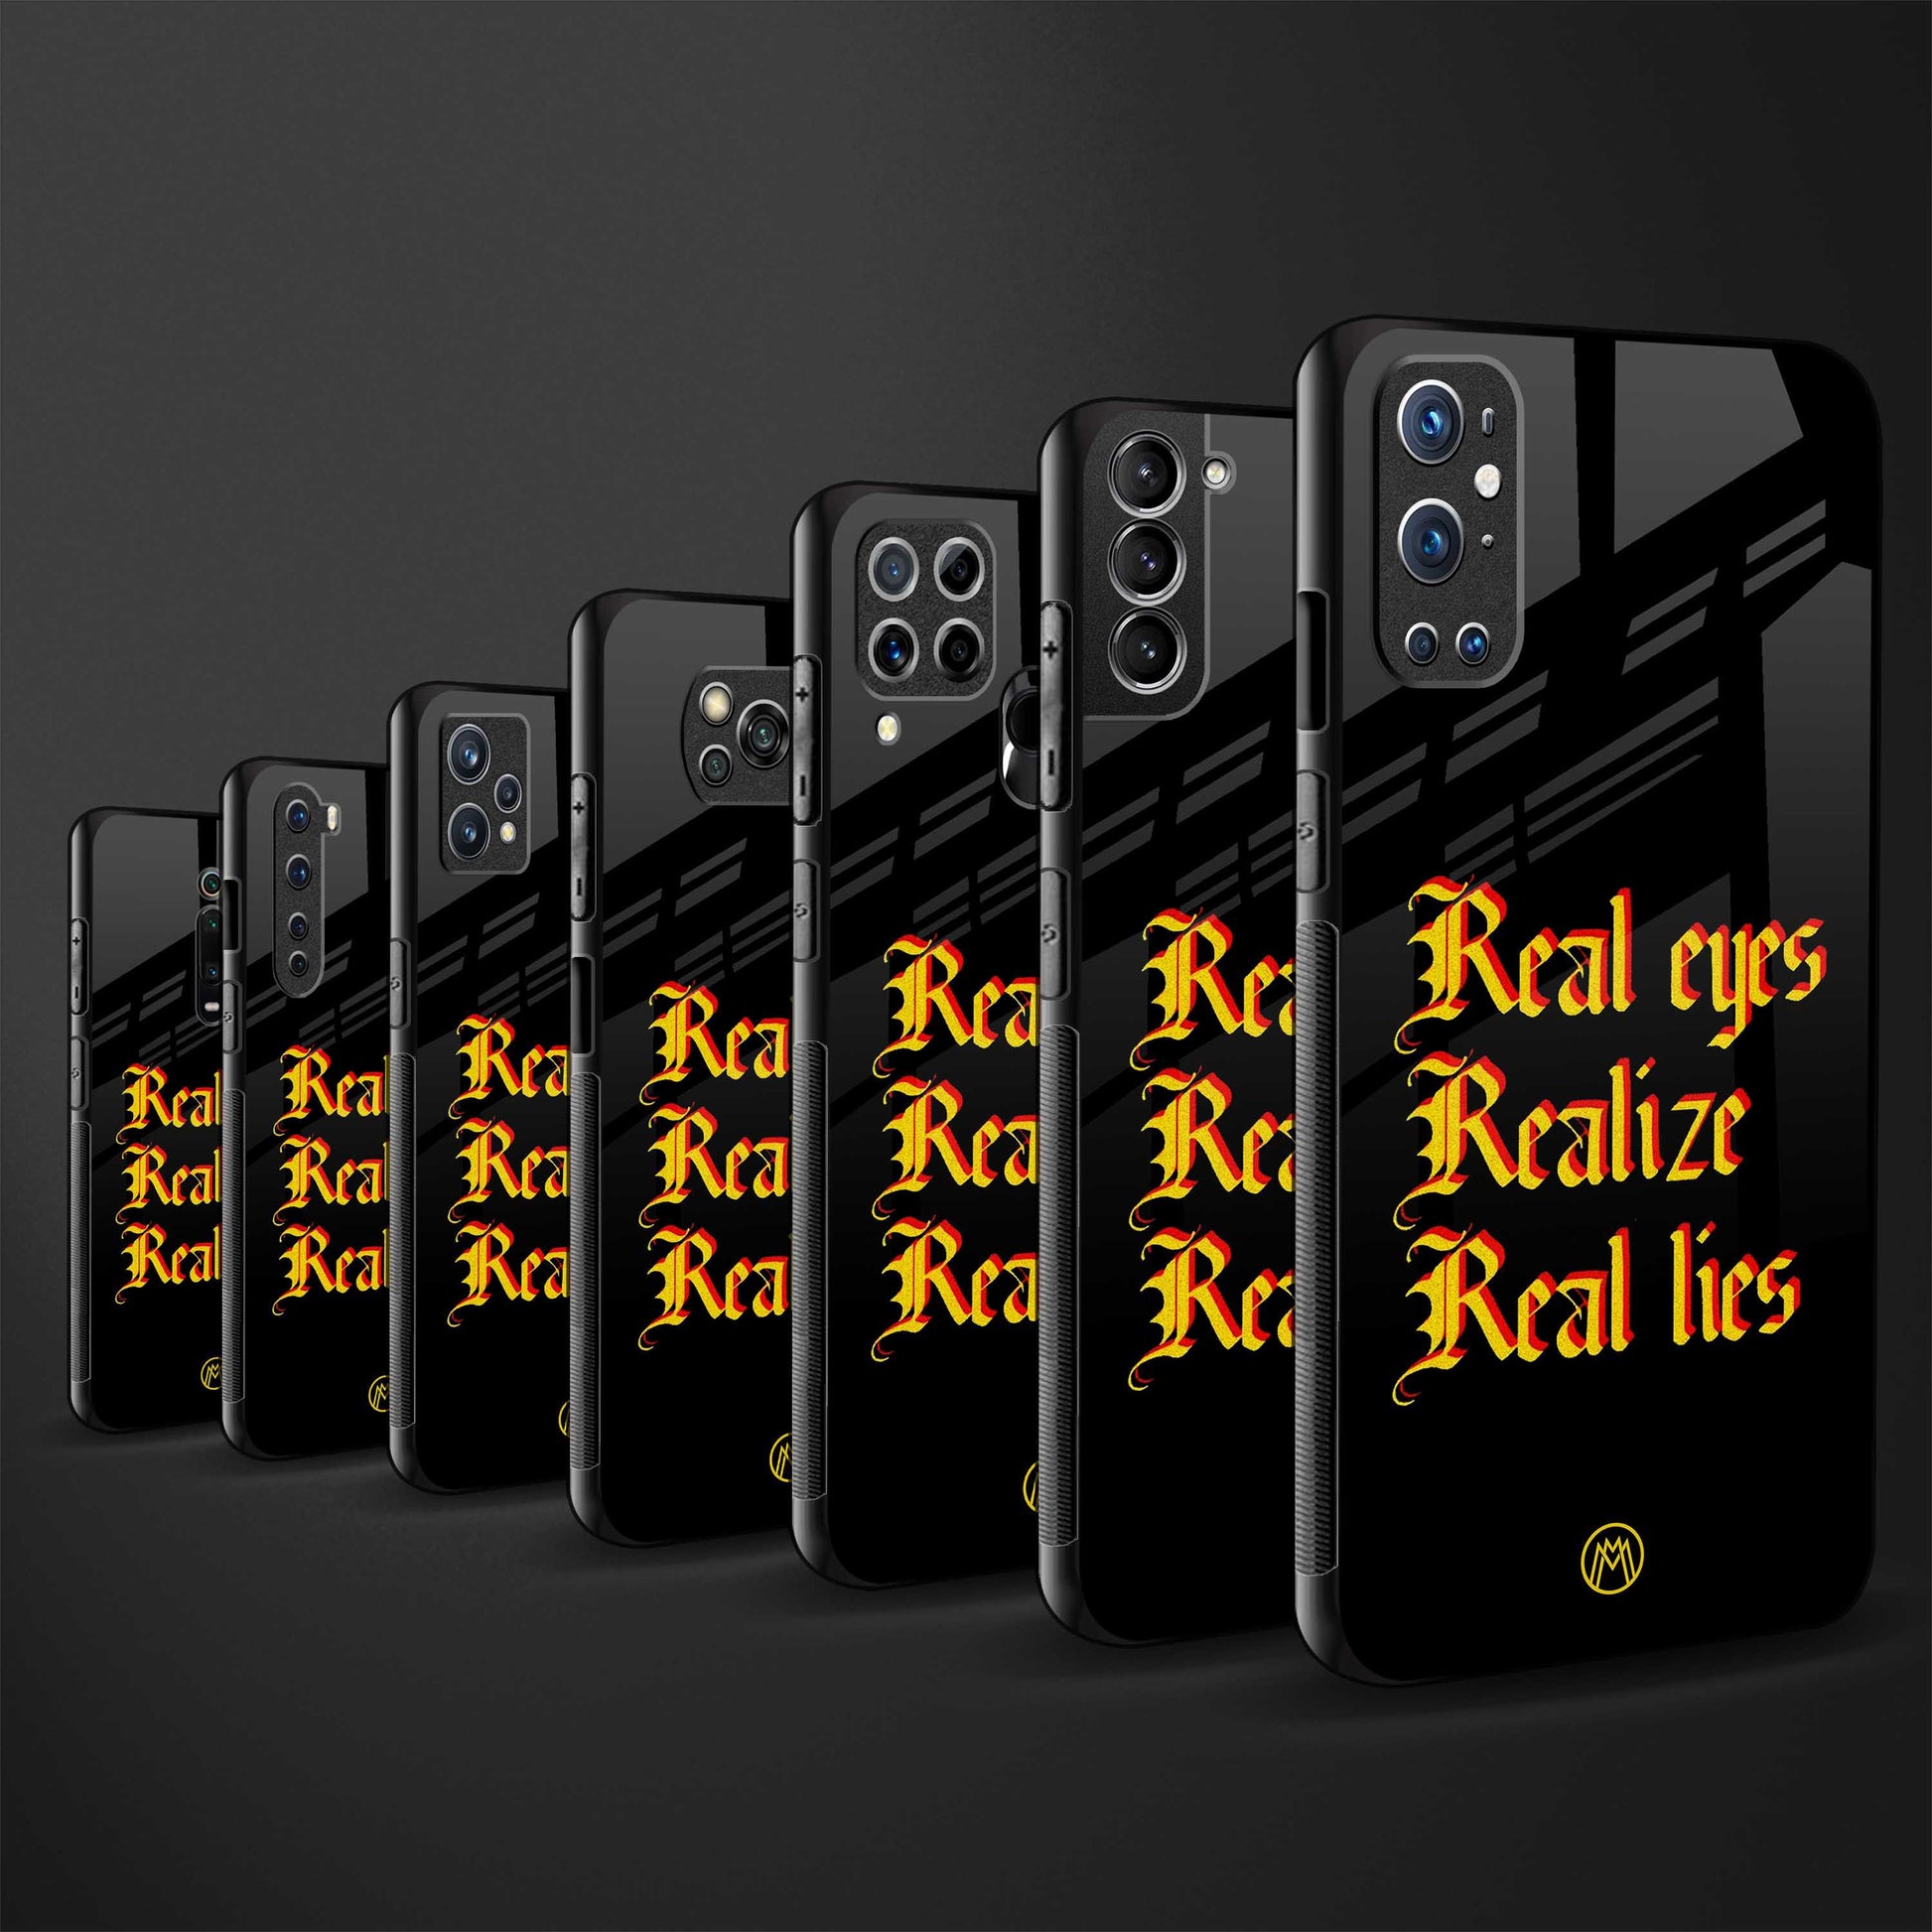 real eyes realize real lies quote glass case for iphone 12 image-3